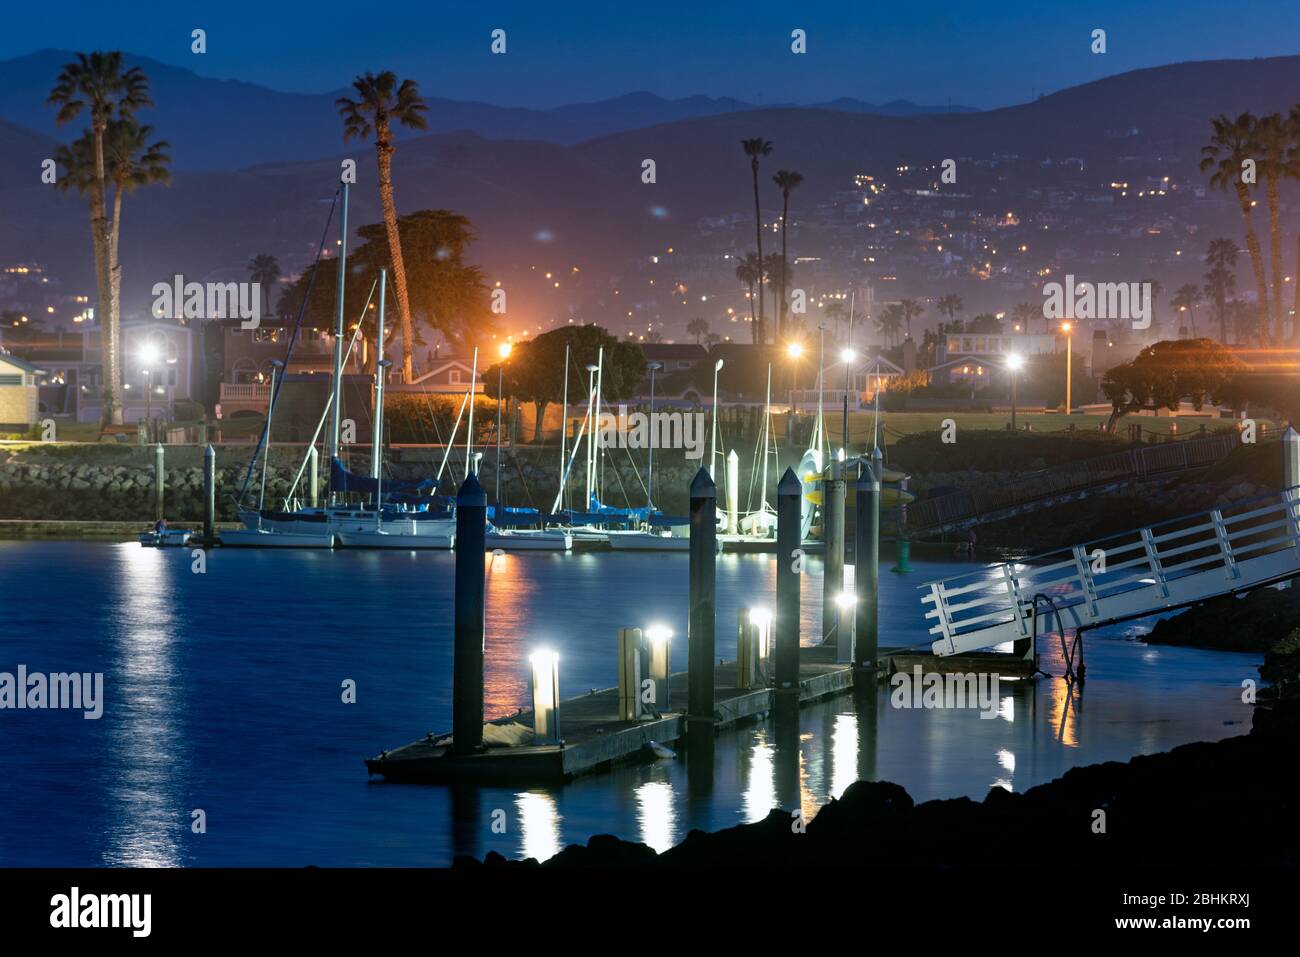 Emtpy cove dock illuminated by lamps on each pier as dawn breaks over the California coast. Stock Photo